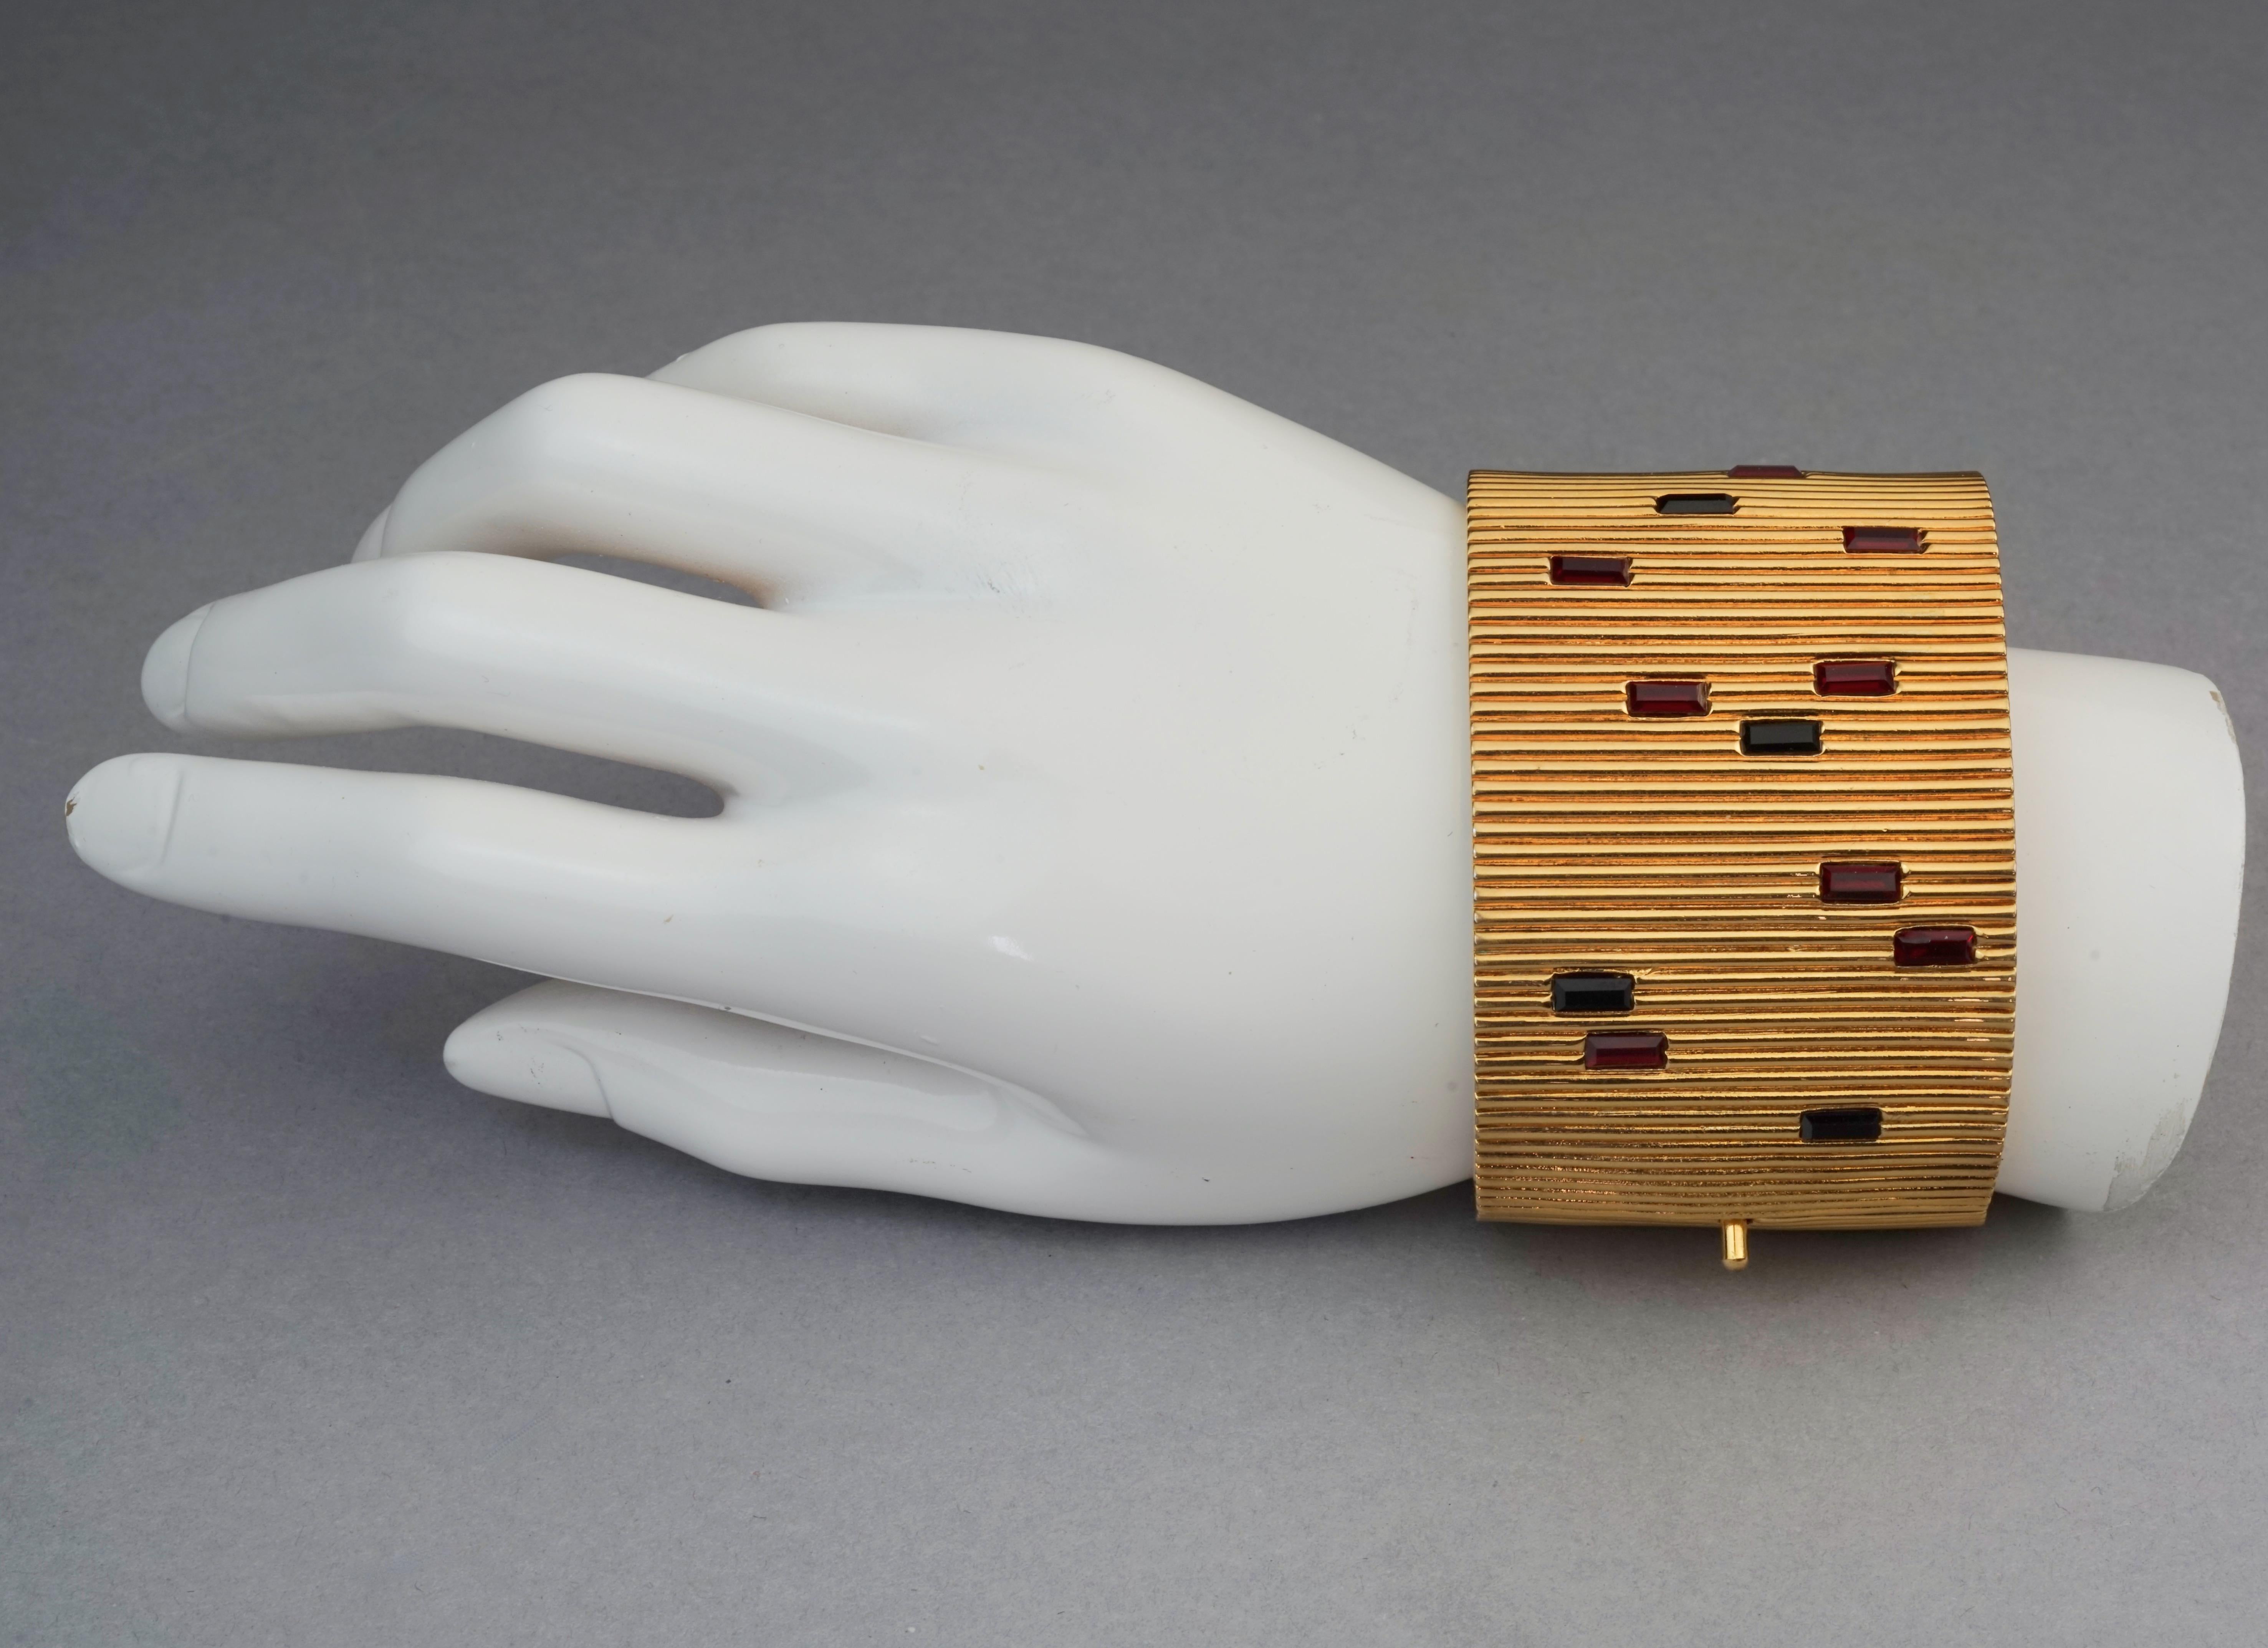 Vintage PALOMA PICASSO Jewelled Ribbed Cuff Bracelet

Measurements:
Height: 1.97 inches (5 cm)
Inner Circumference: 7.48 inches (19 cm)

Features:
- 100% Authentic PALOMA PICASSO.
- Ribbed cuff bracelet embellished with ruby and black baguette